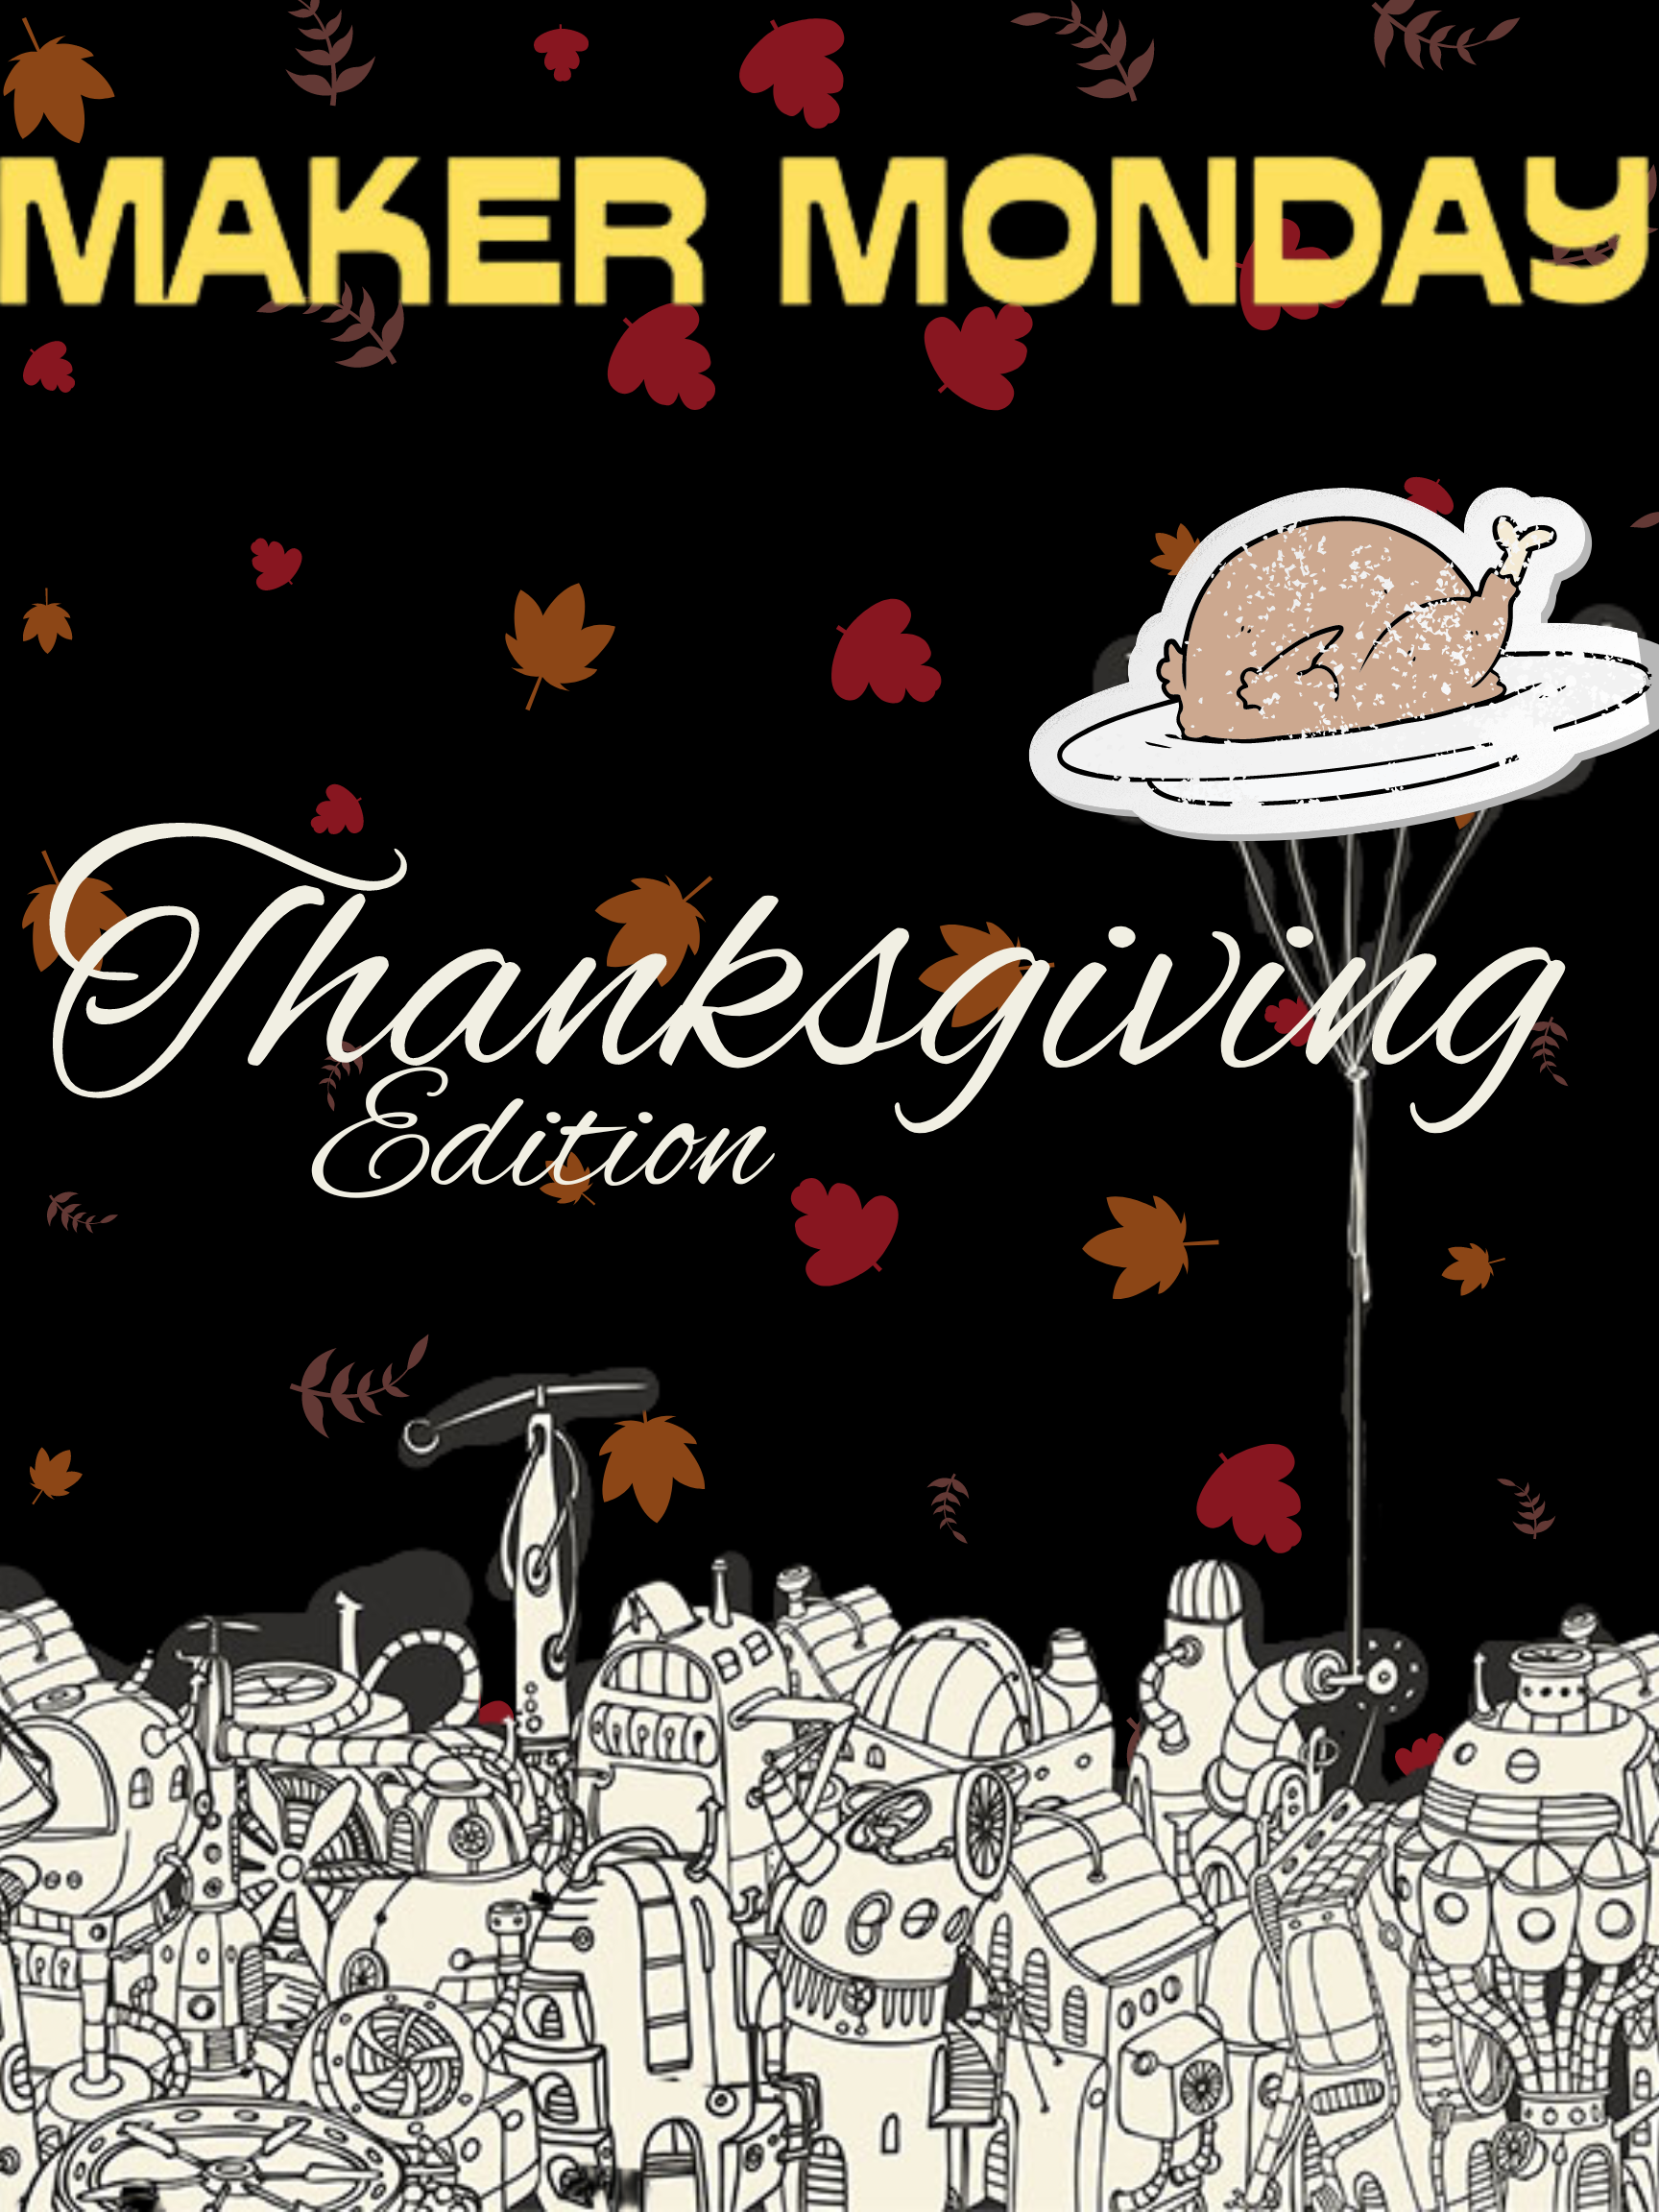 Thanksgiving edition of Maker Monday poster